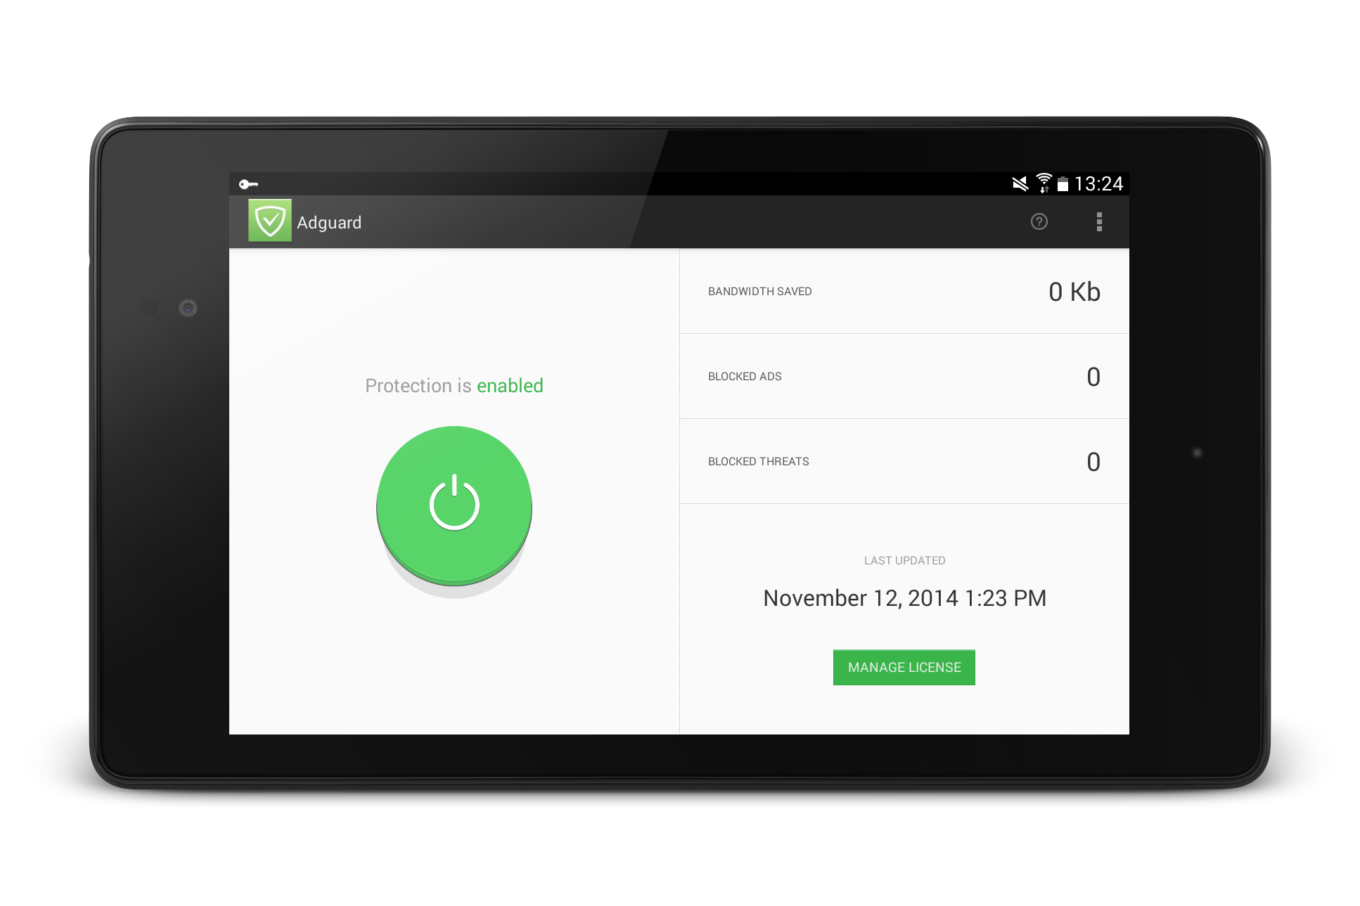 11/13/2014 - Adguard app for Android